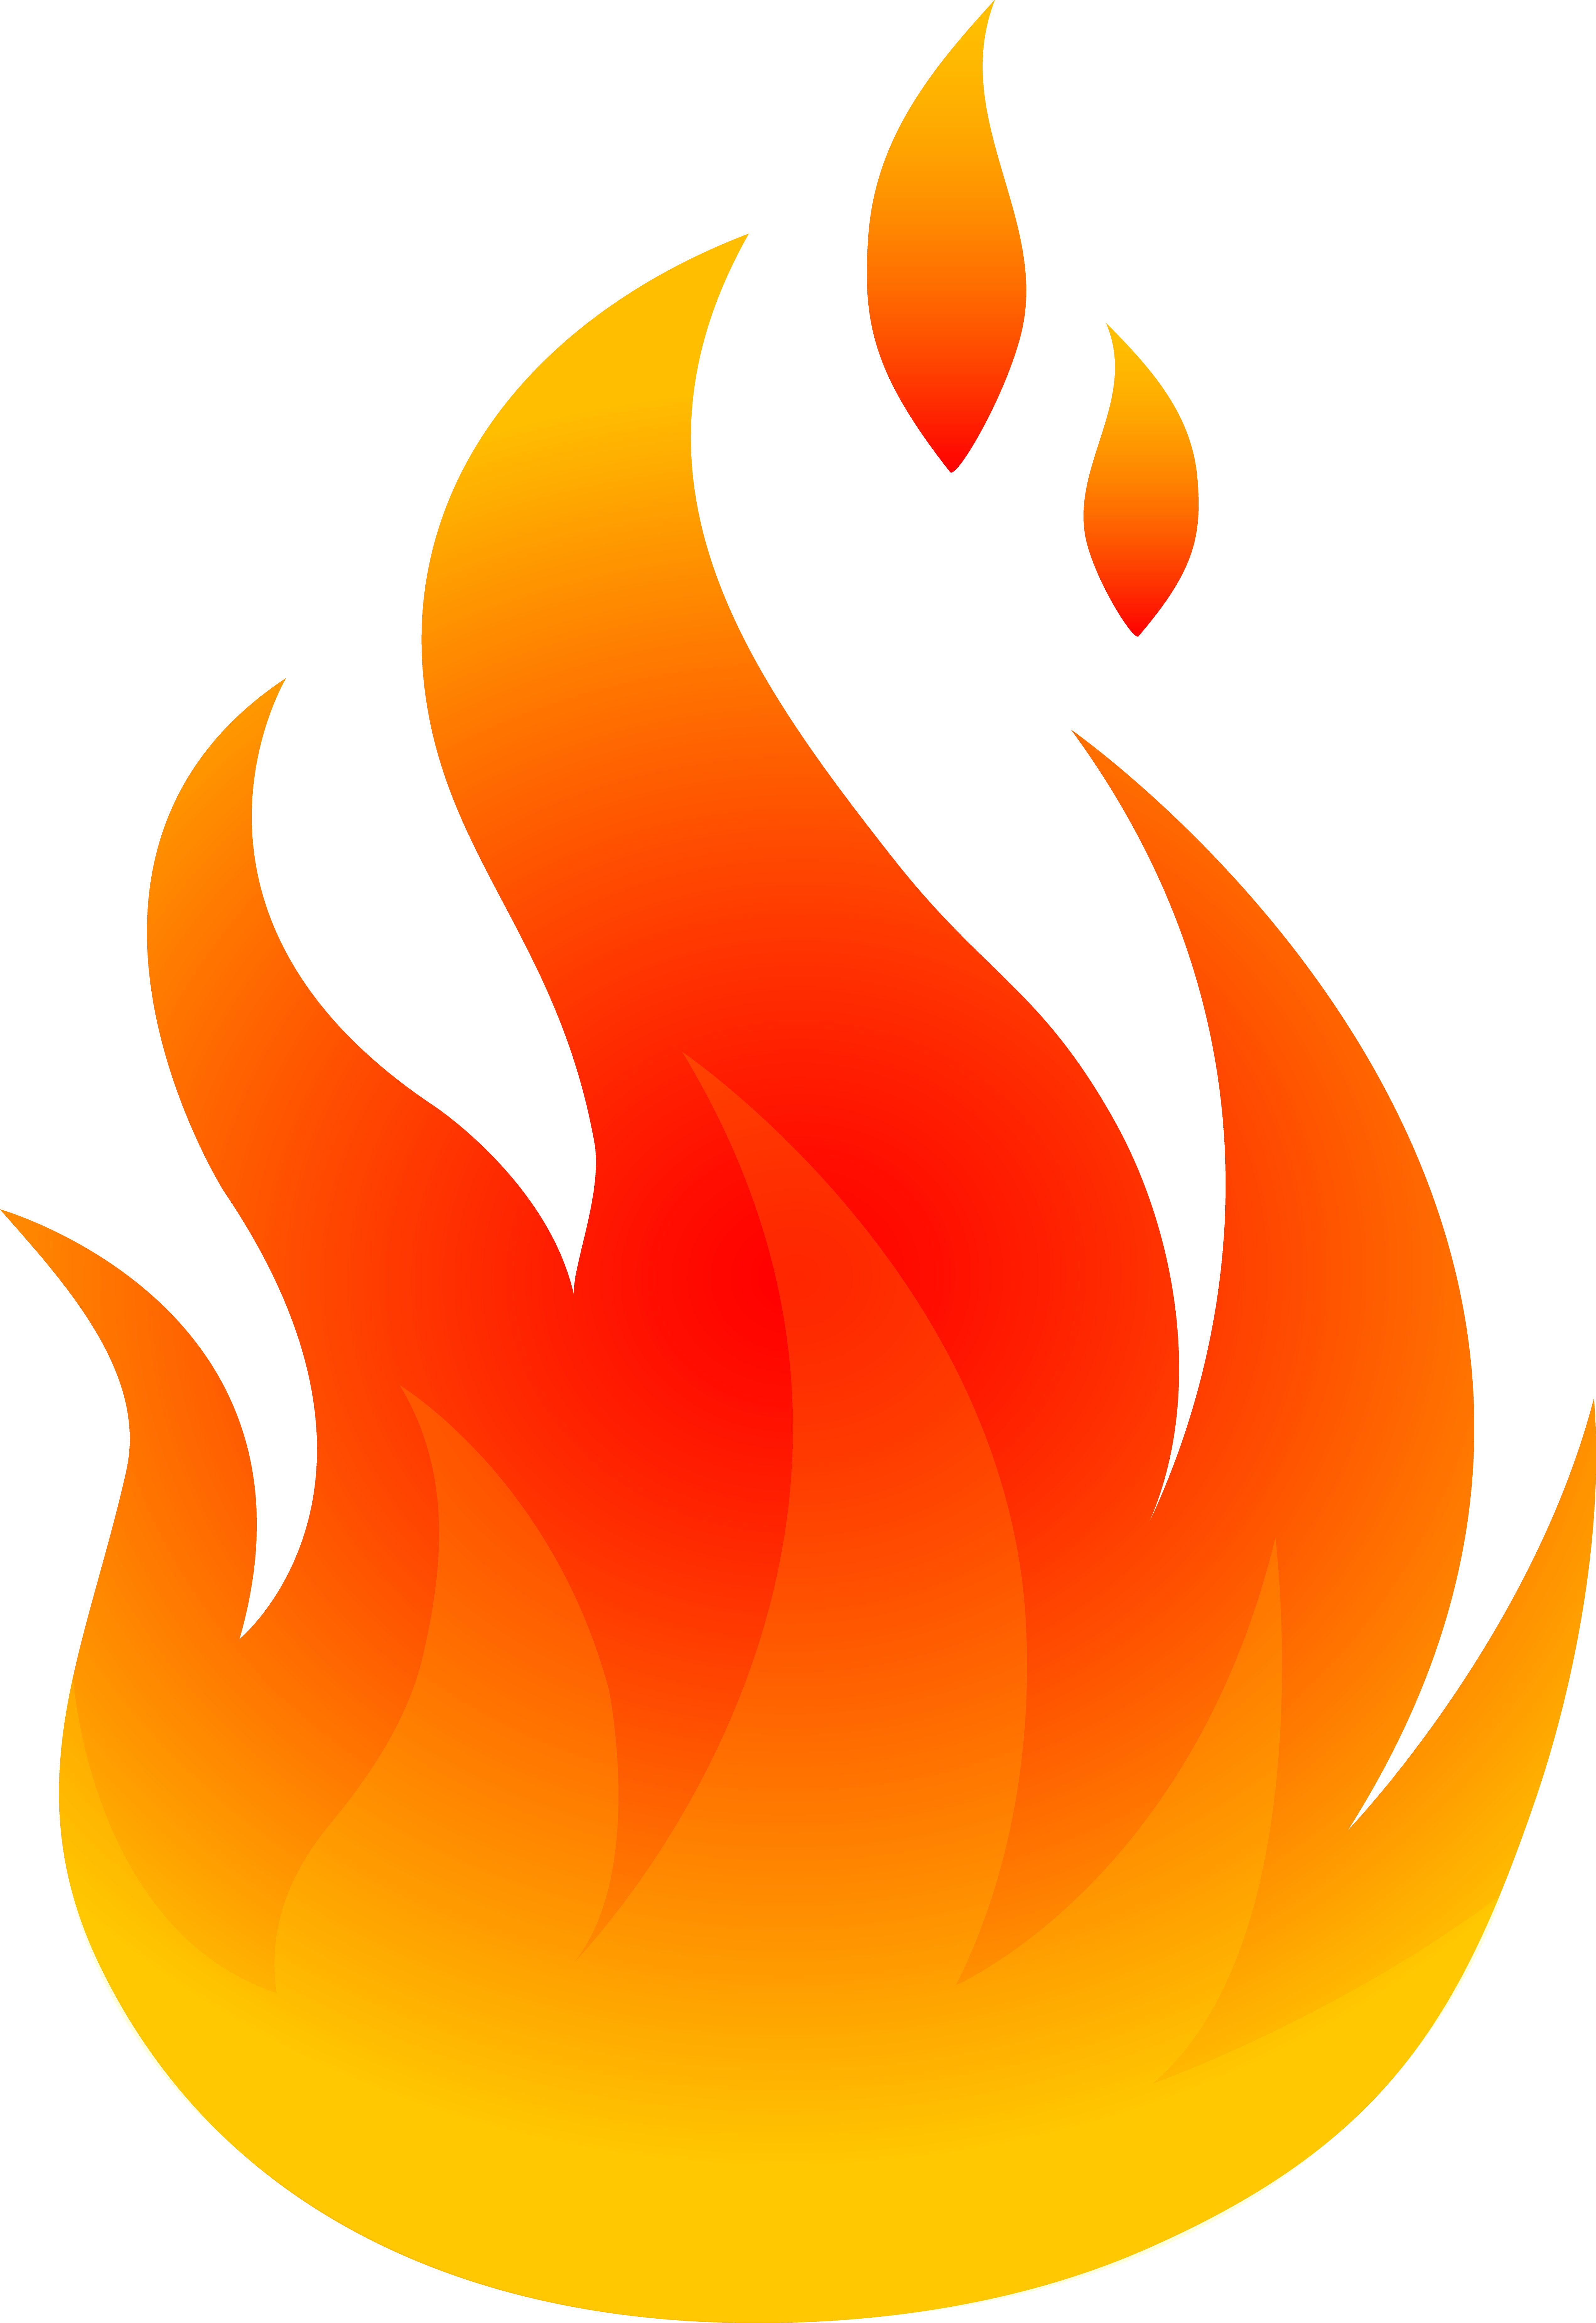 Fire flames clipart free clipart images